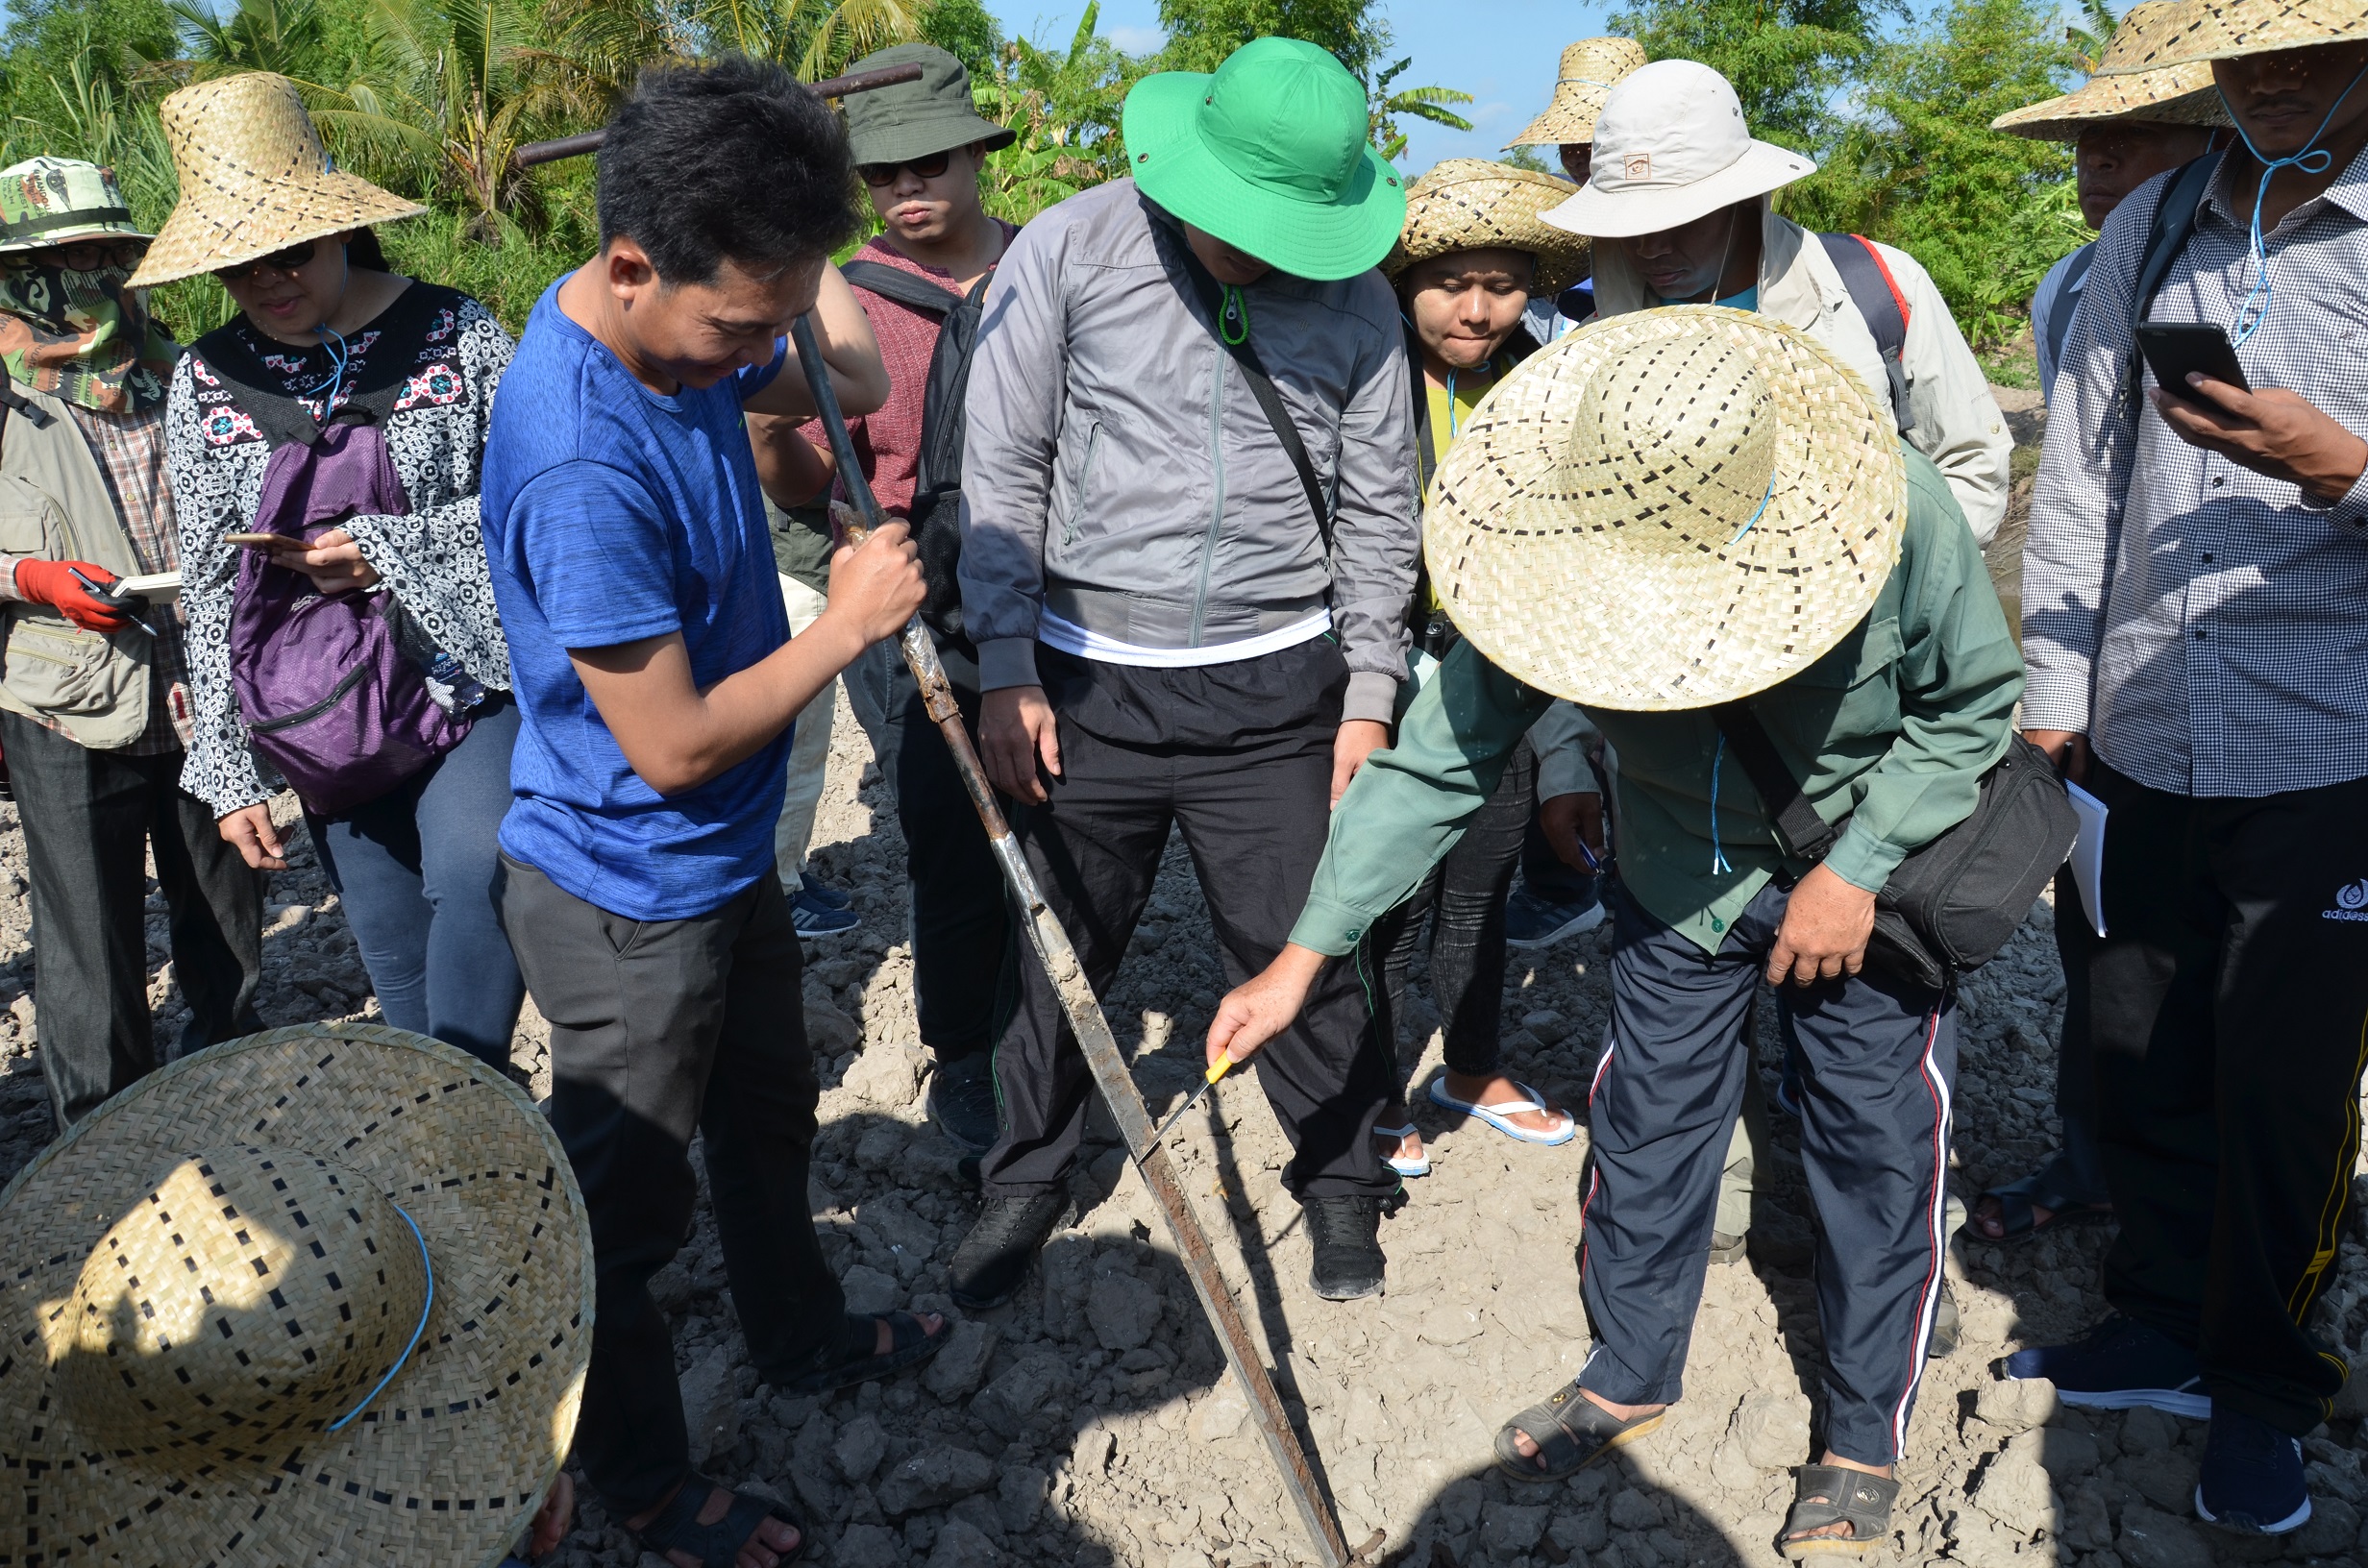 Instructor Dr. Duong Van Ni demonstrates soil sampling and explains how it can be used to gather data on wetlands